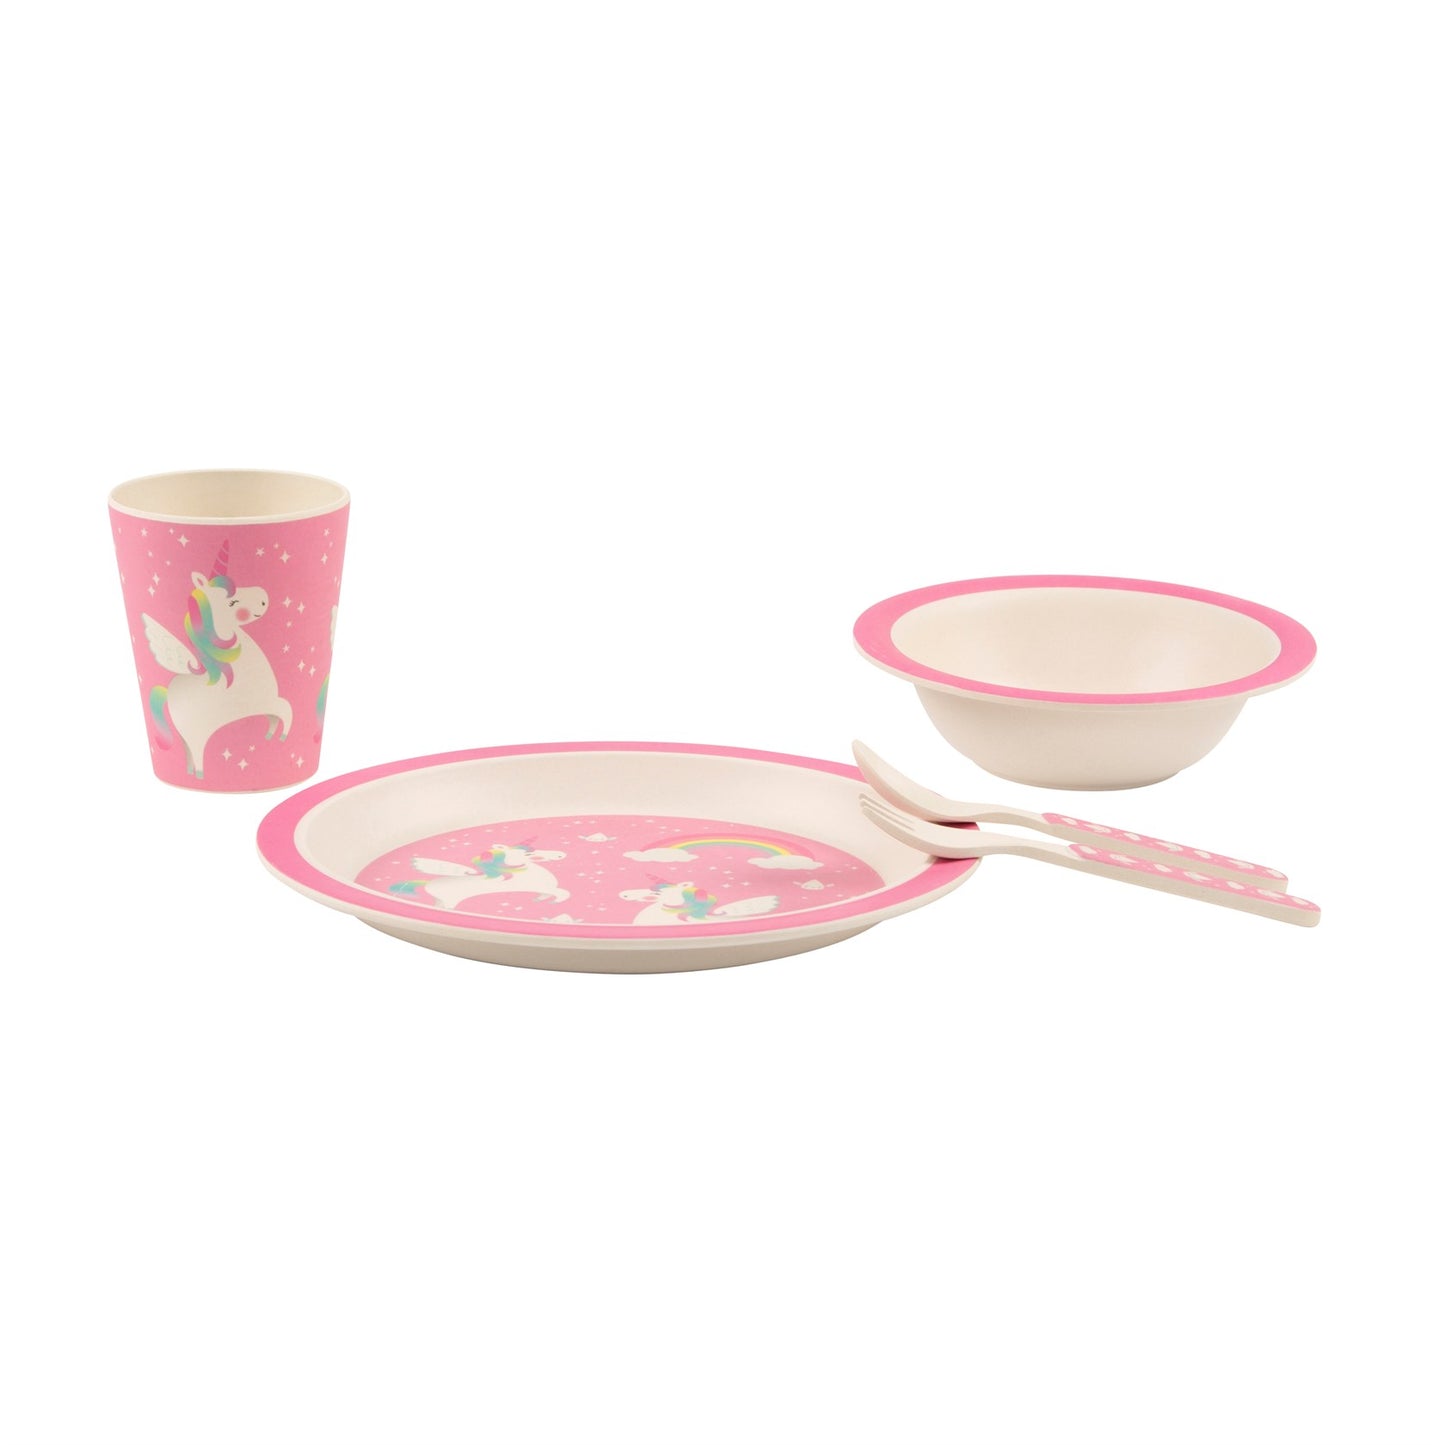 Fly away with this bamboo tableware and cutlery set in a pretty pink colour scheme, with a magical rainbow unicorn themed design.